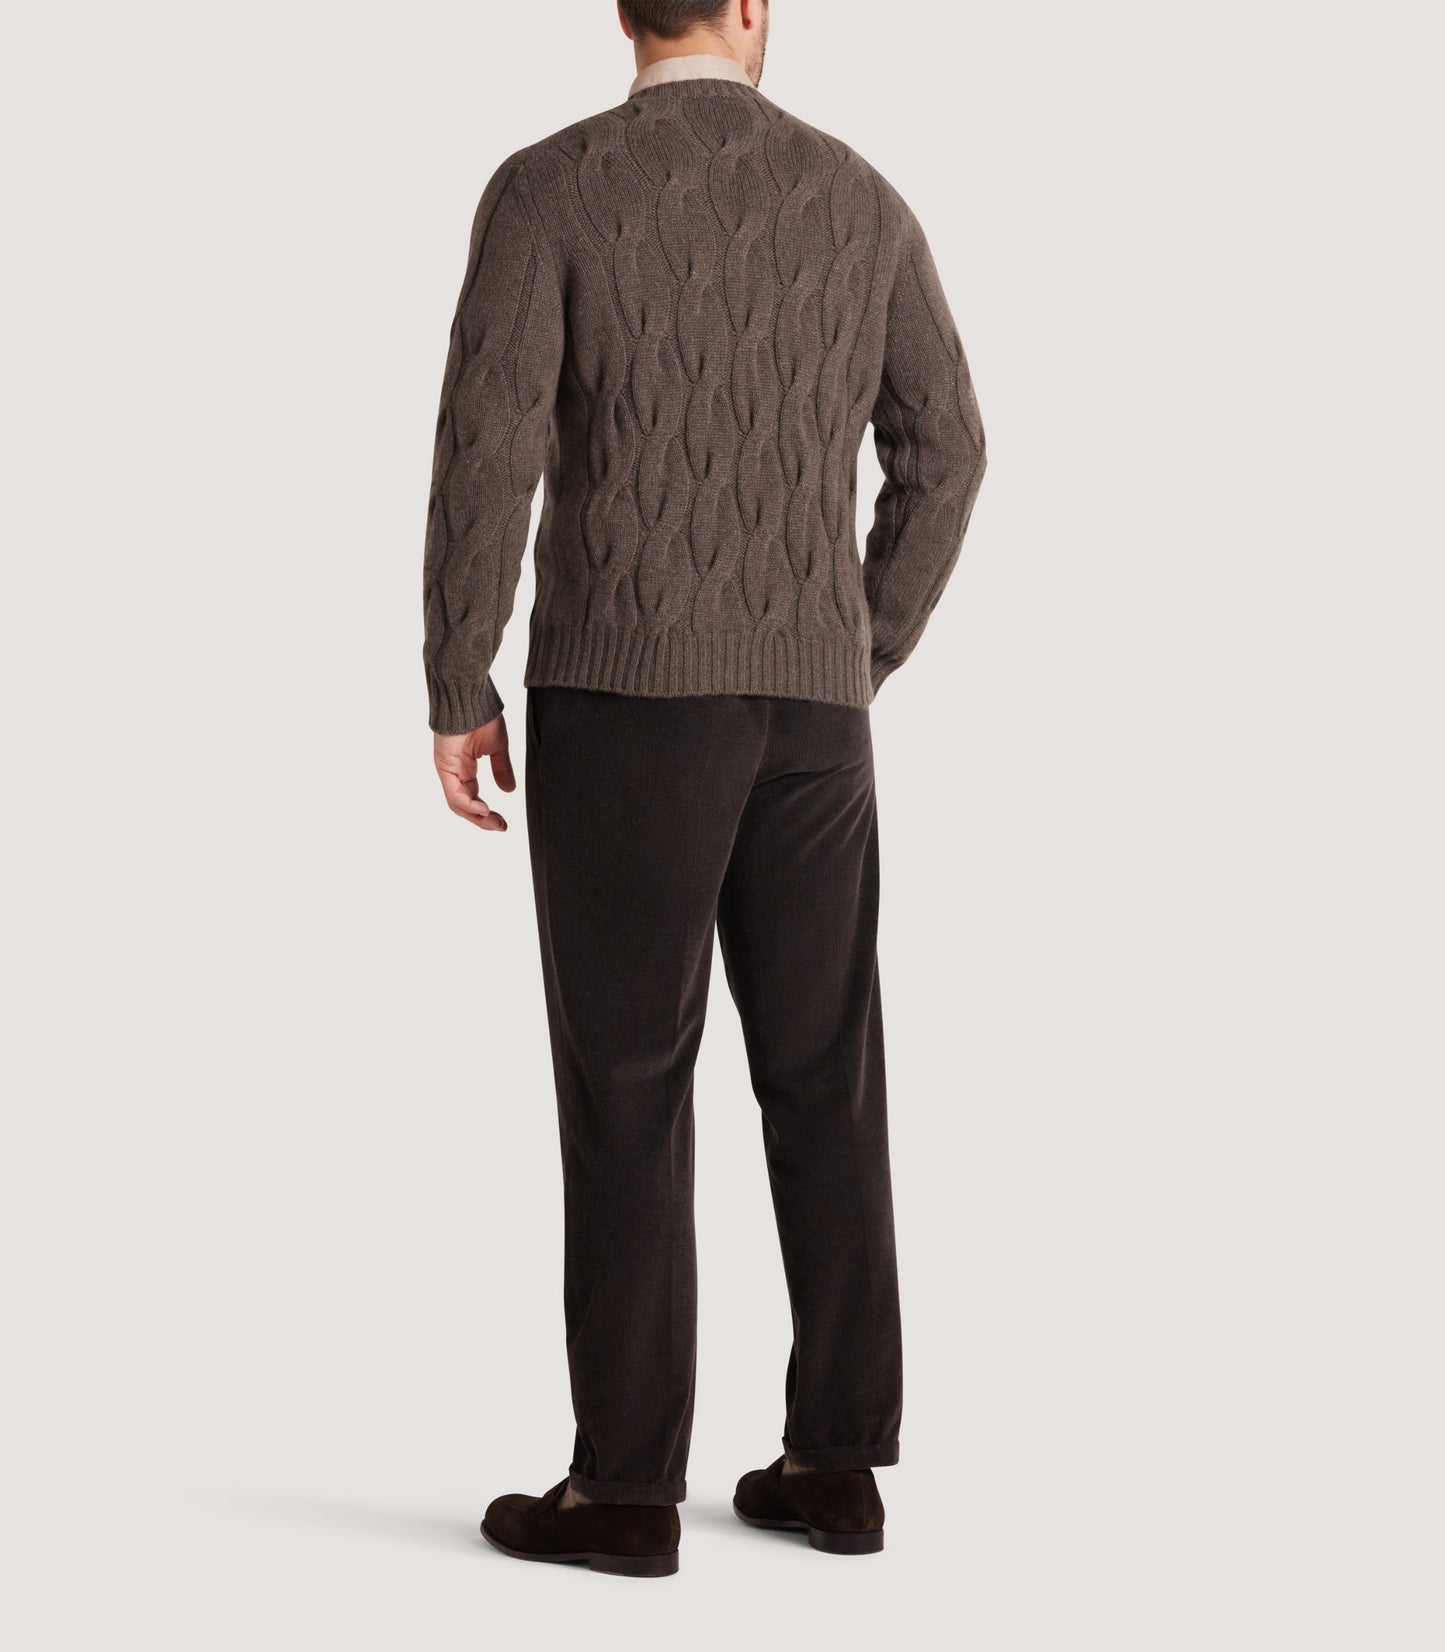 Men's Cashmere Loch Cable Crew Neck Sweater In Dark Taupe